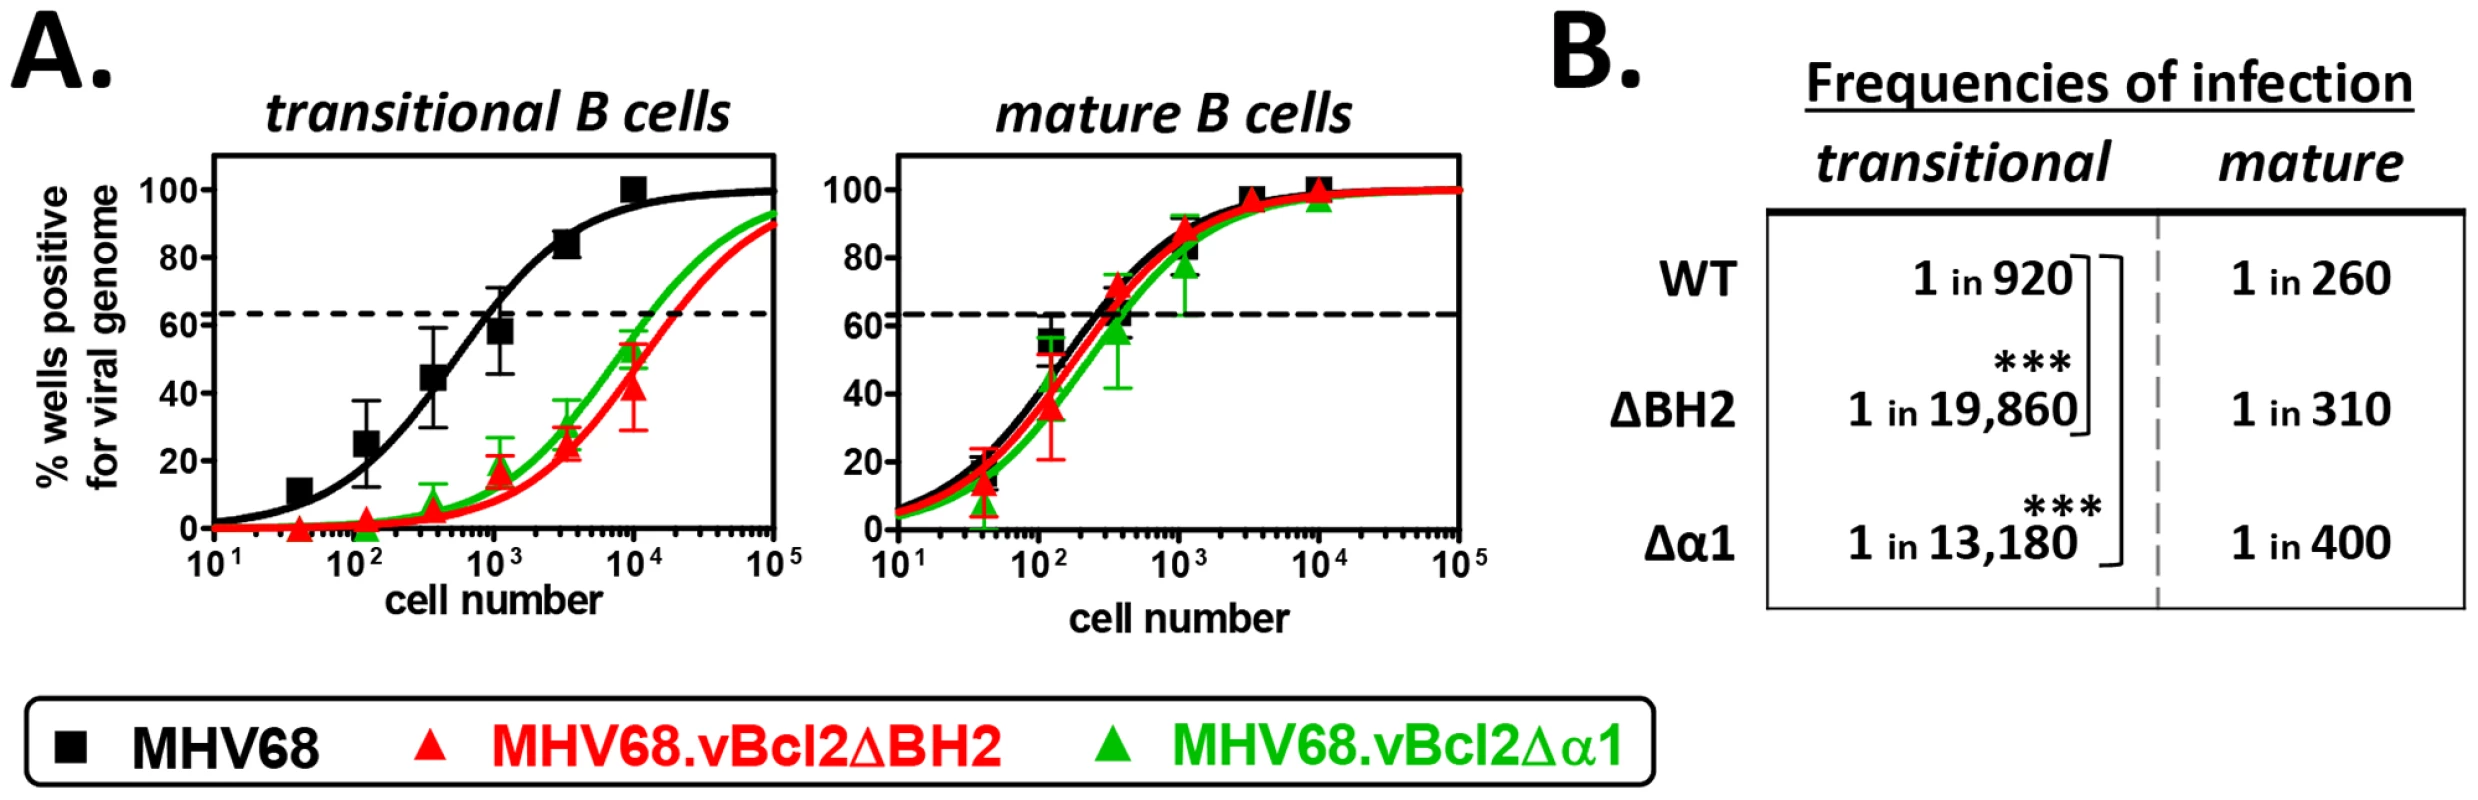 Both BH2 and α1 domains of vBcl-2 are required for efficient infection of transitional B cells.